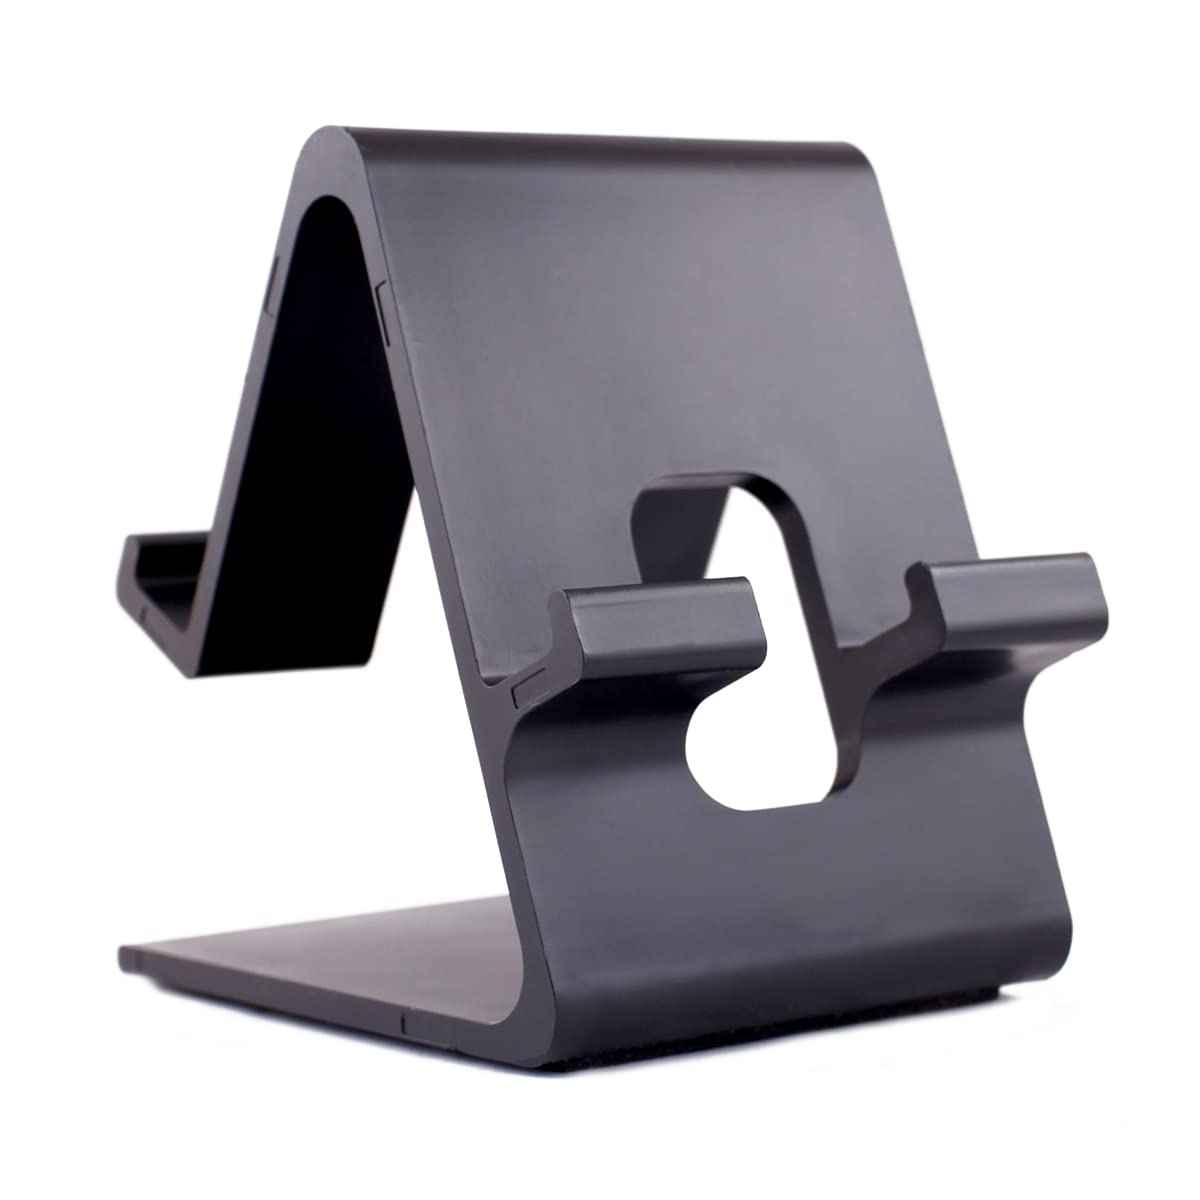 Plastic Mobile Stand Double Side,Desktop Stand Holder Dock for All Smartphones and Tablets of Any Size (Black) (Double Hold)